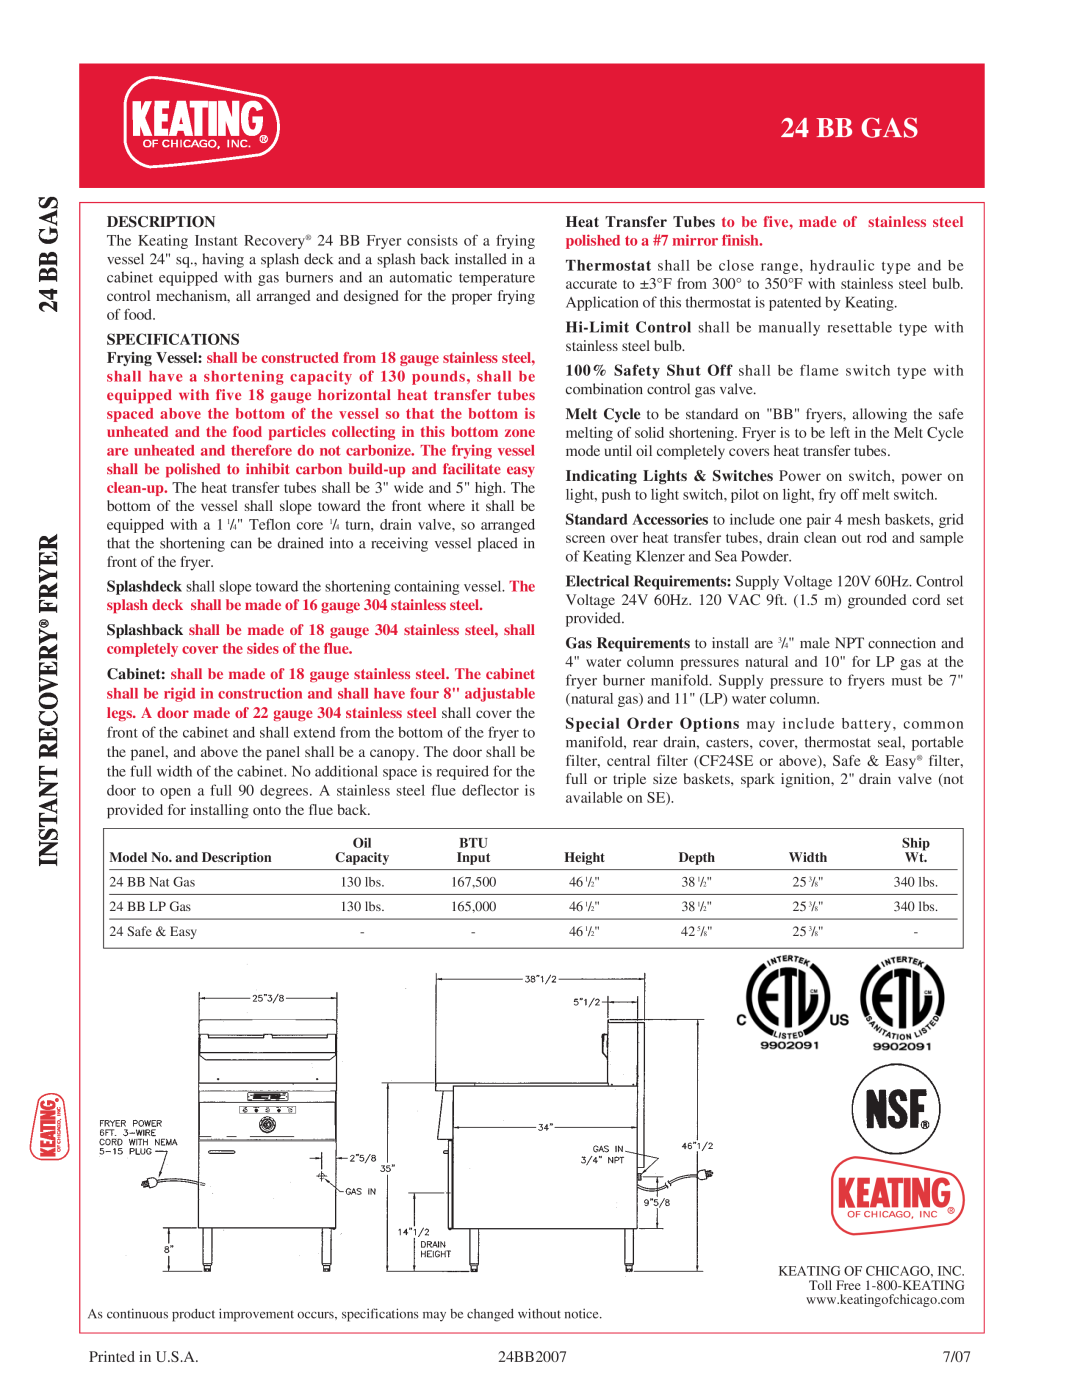 Keating Of Chicago 24 BB Gas manual Bb Gas Instant Recovery Fryer, Description, Specifications 